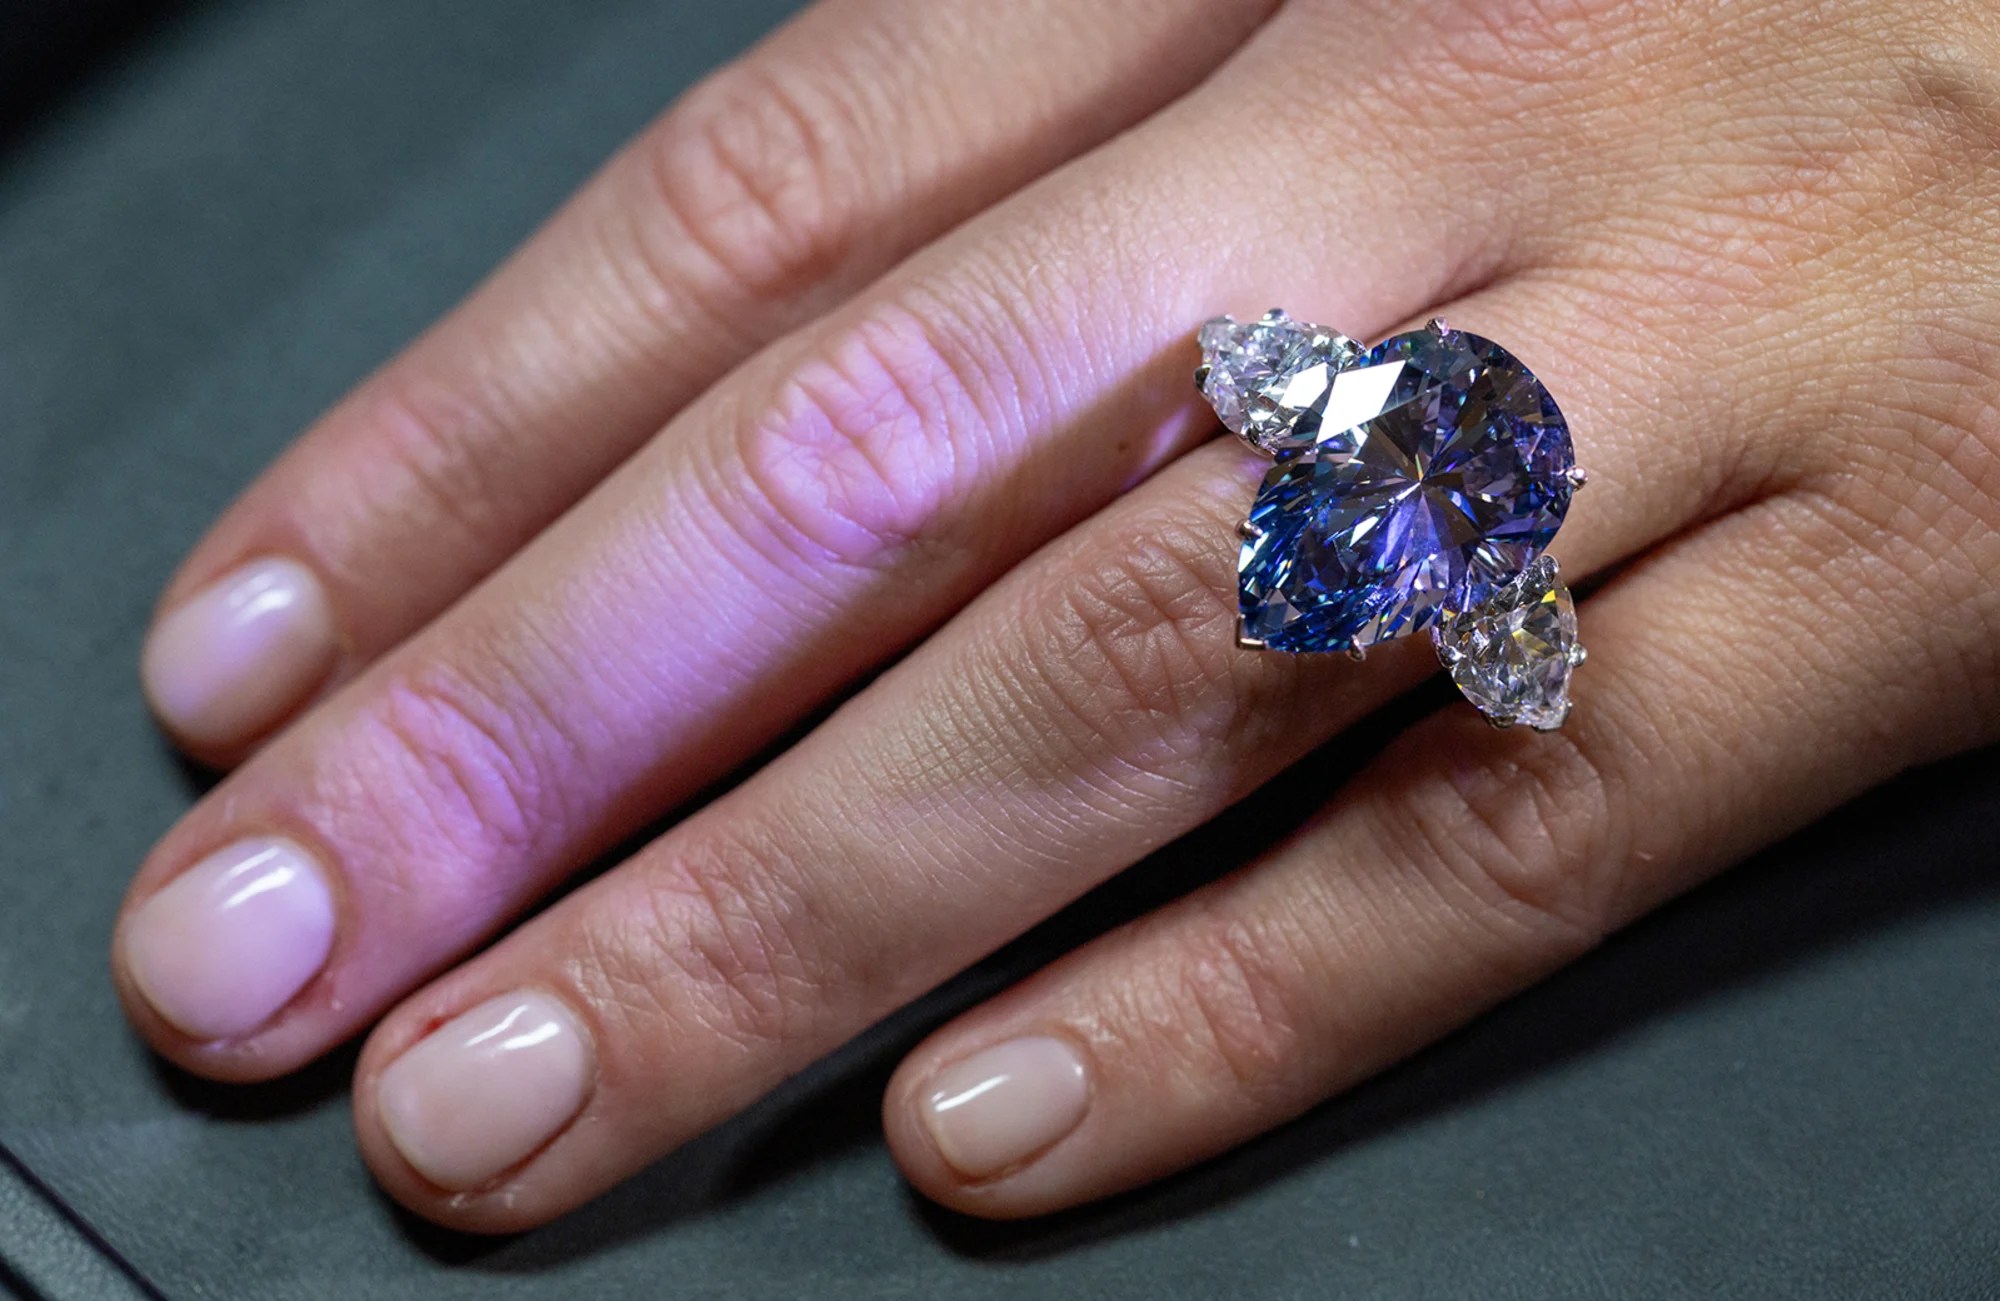 “Flawless” blue diamond could fetch $50 million at auction